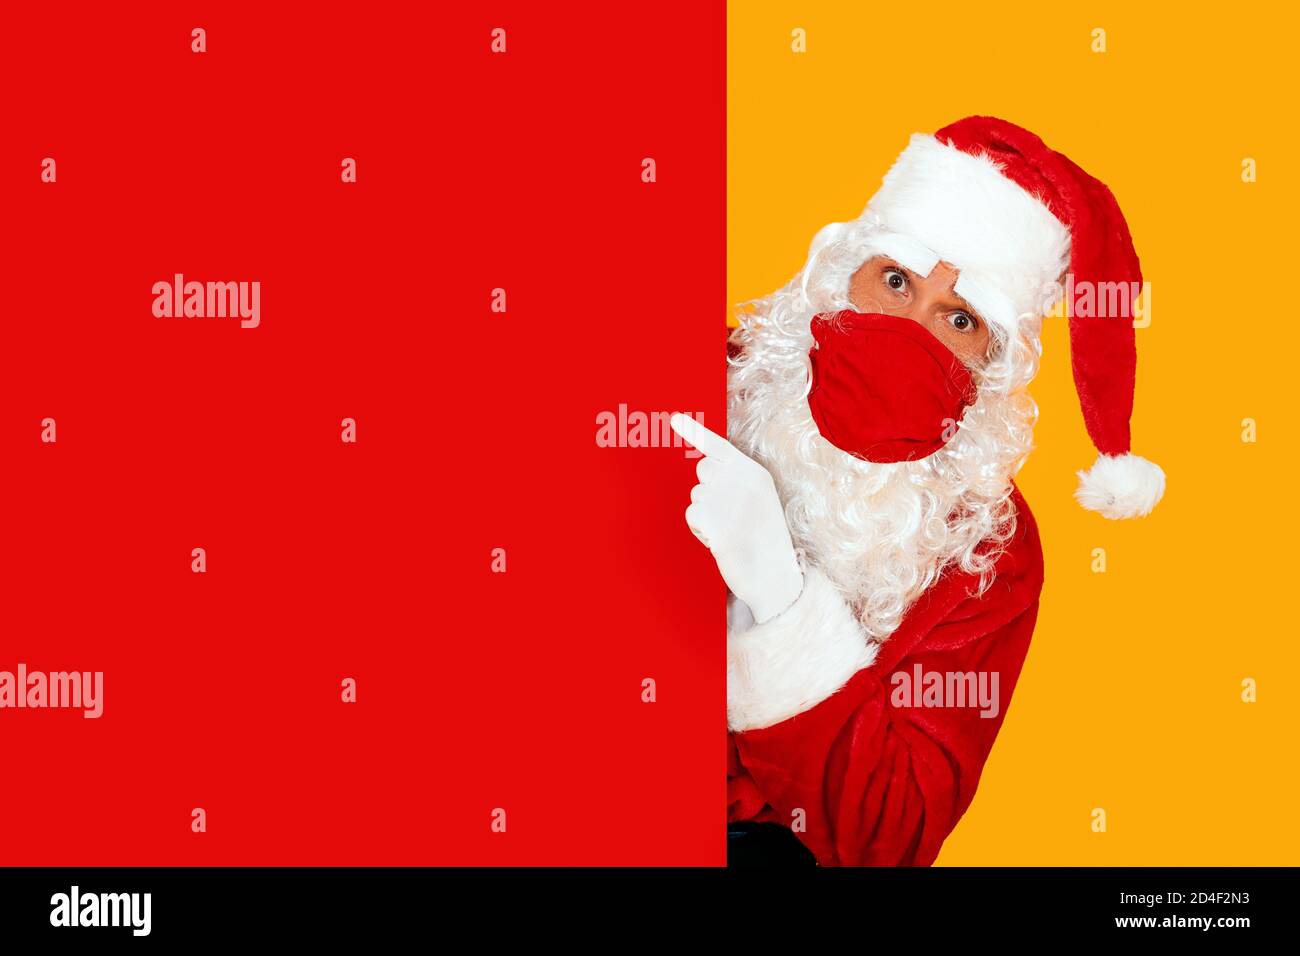 astonished santa claus wearing a red face mask pointing to a red blank space Stock Photo